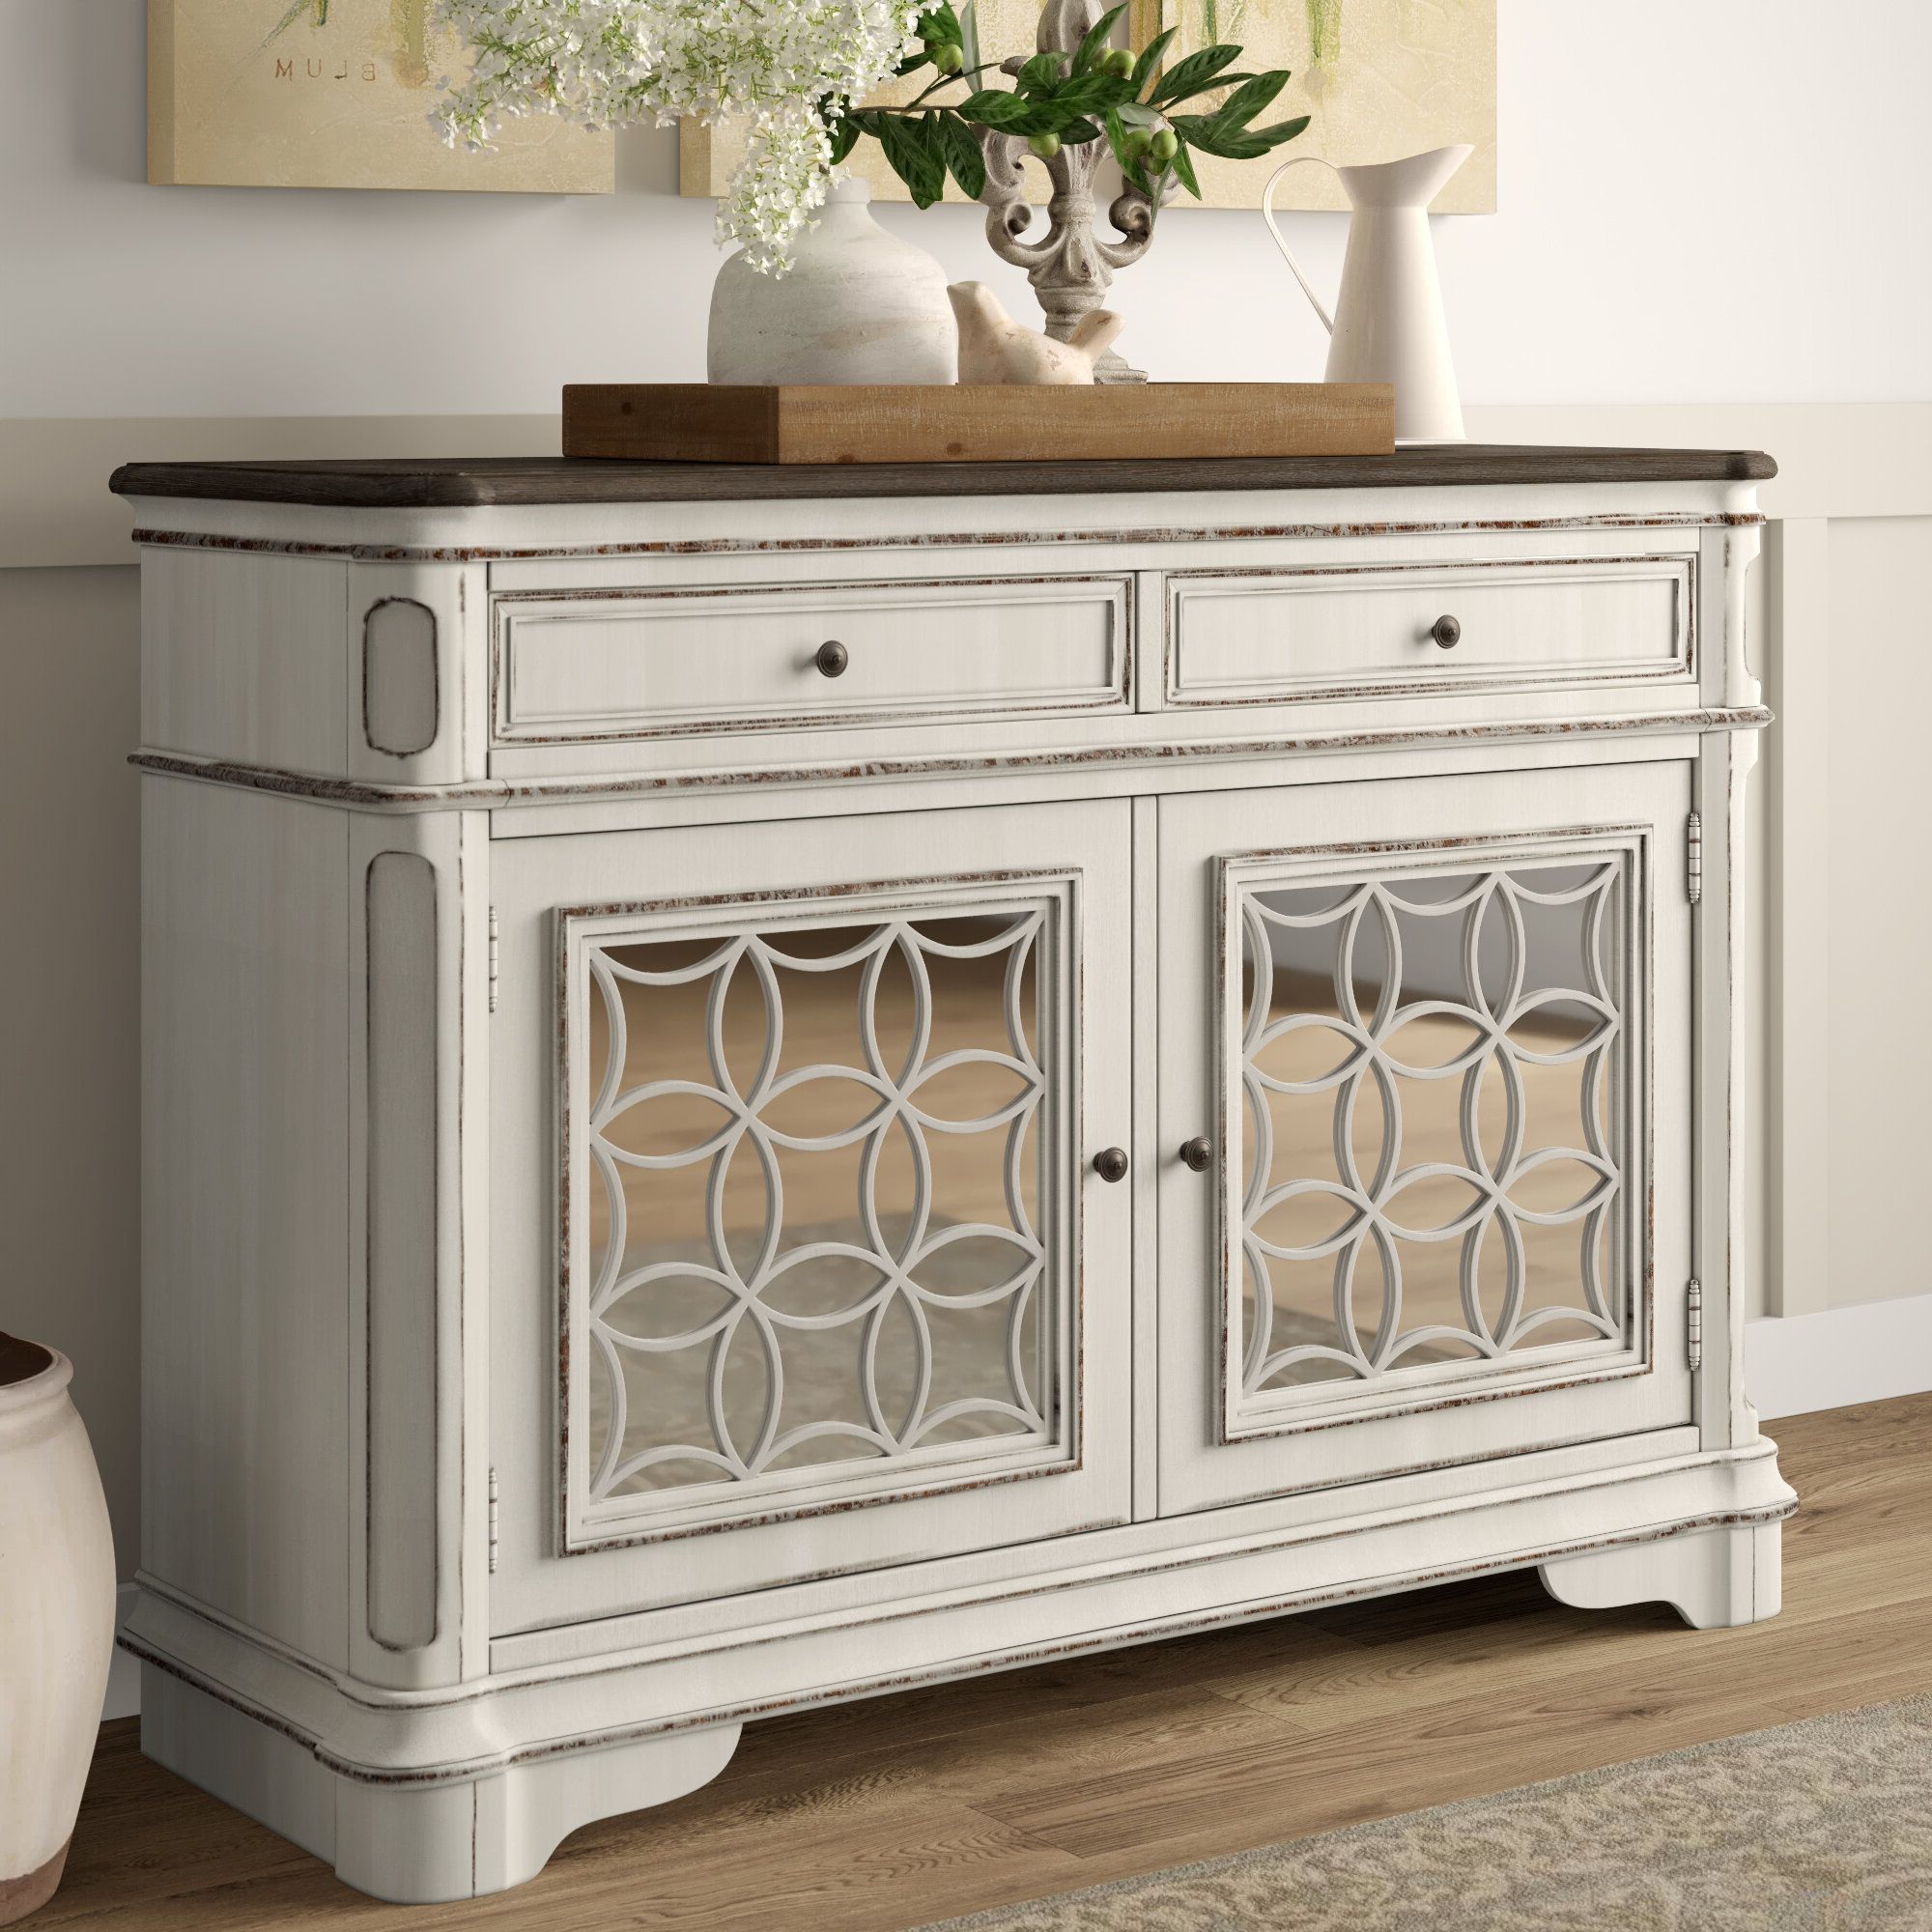 Lark Manor Tiphaine Sideboard Intended For Tiphaine Sideboards (Gallery 6 of 20)